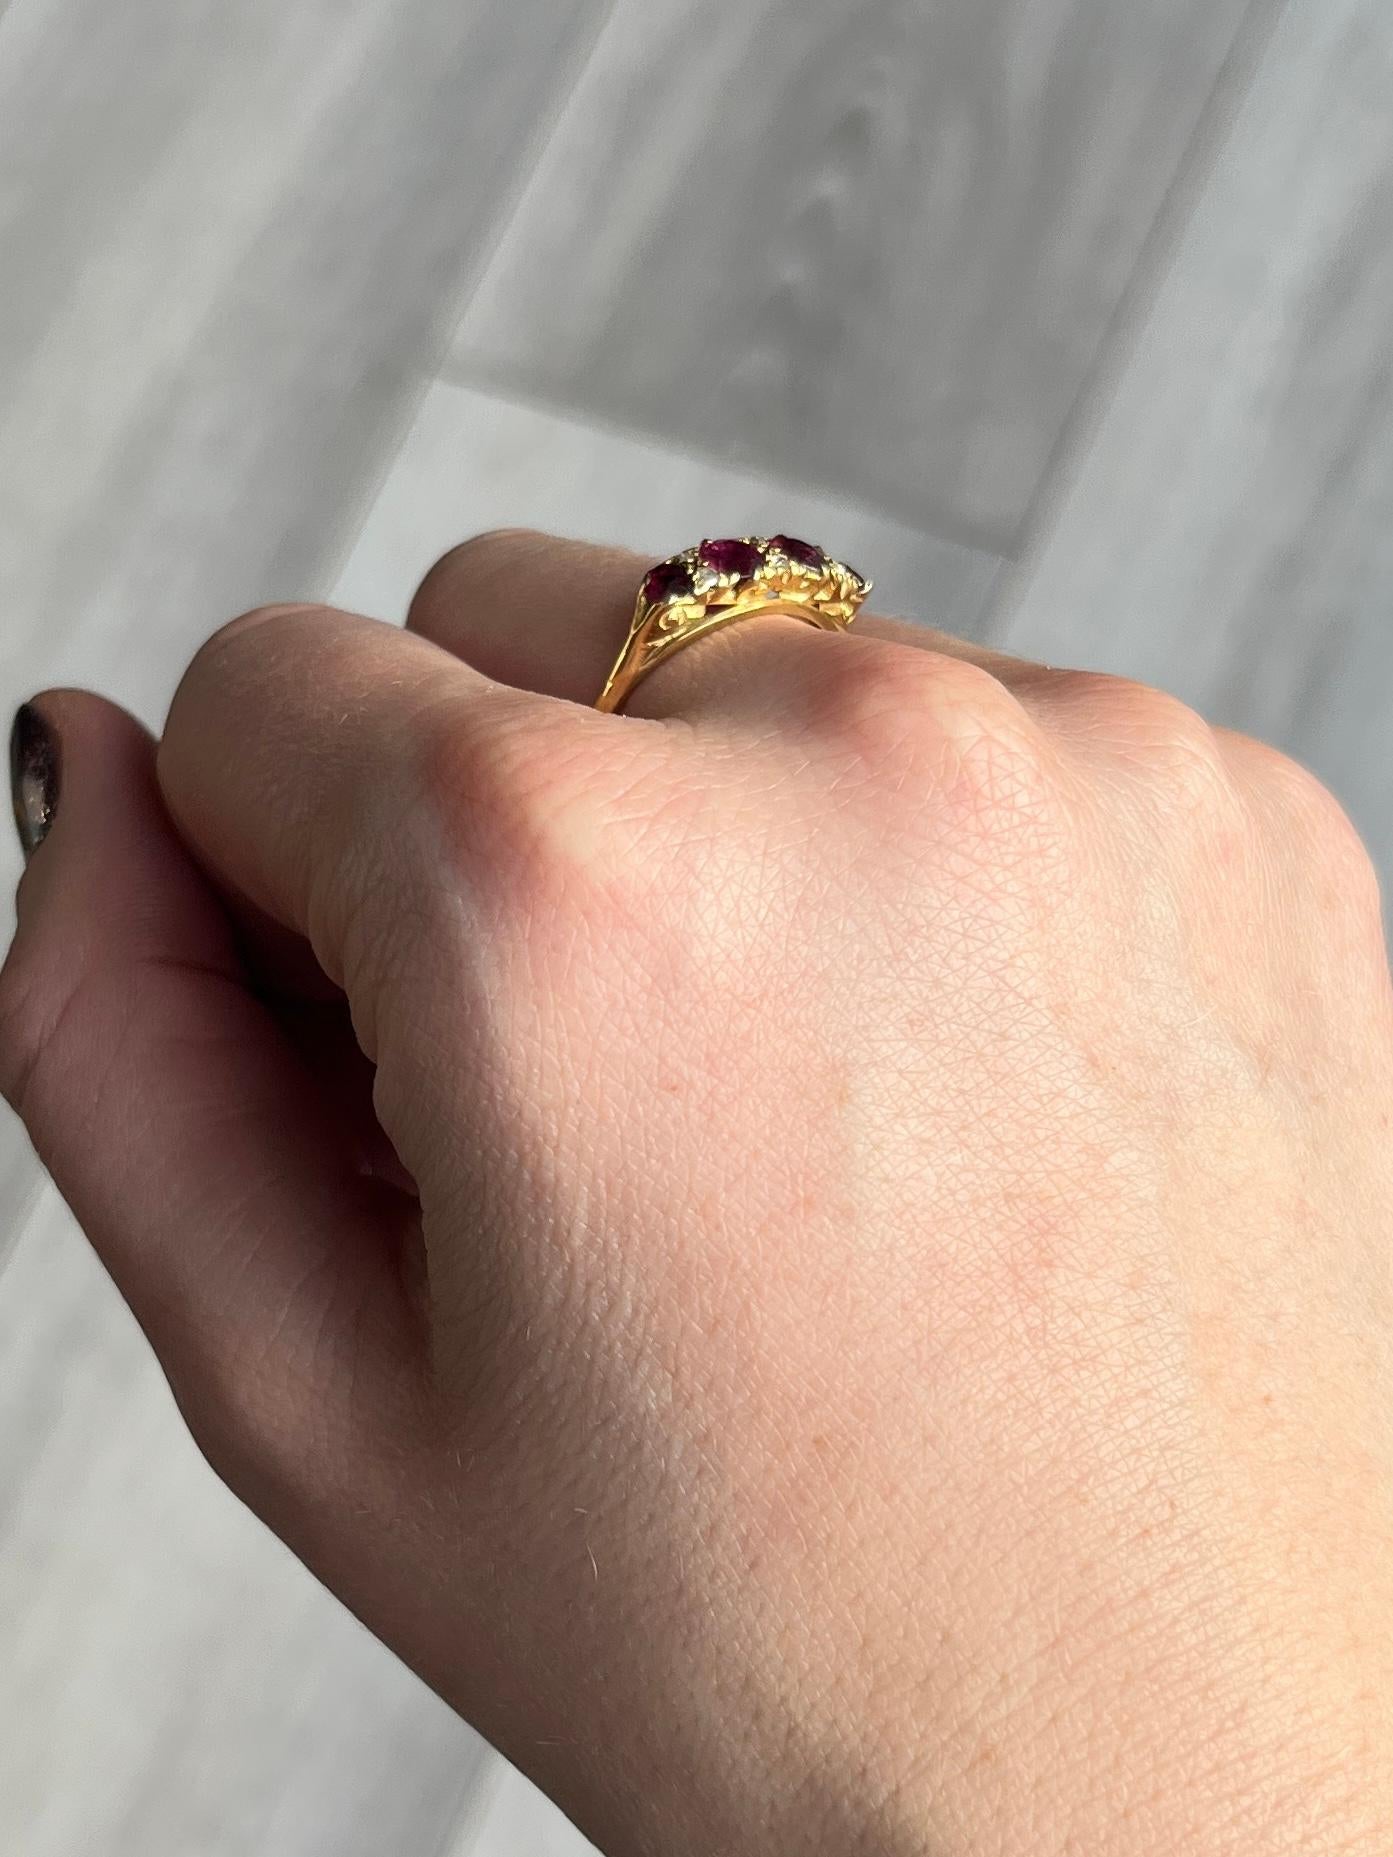 Set in this glossy 18ct gold ring are four rubies totalling 80pts and six rose cut diamonds. The stones are set flush within the decorative scroll setting. 

Ring Size: O 1/2 or 7 1/2 
Head Width: 5mm
Height Off Finger: 4mm

Weight: 3.1g